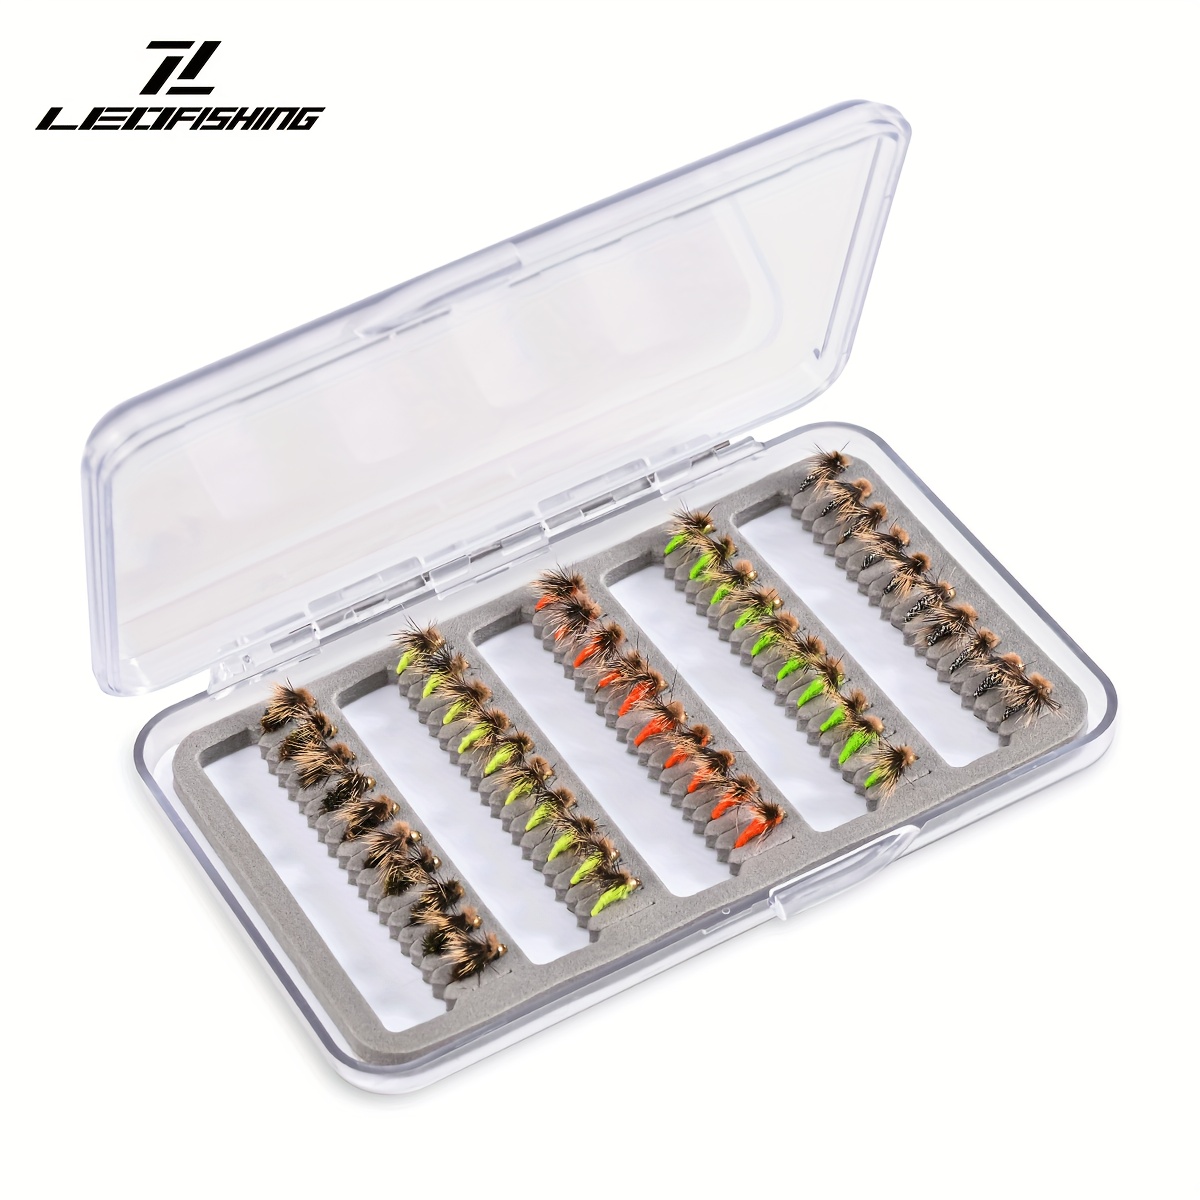 LEOFISHING 50pcs Artificial Bionic Flies Bait Hooks, Dry/Wet Fly Fishing  Lures With Waterproof Box, Fishing Gear For Freshwater And Saltwater